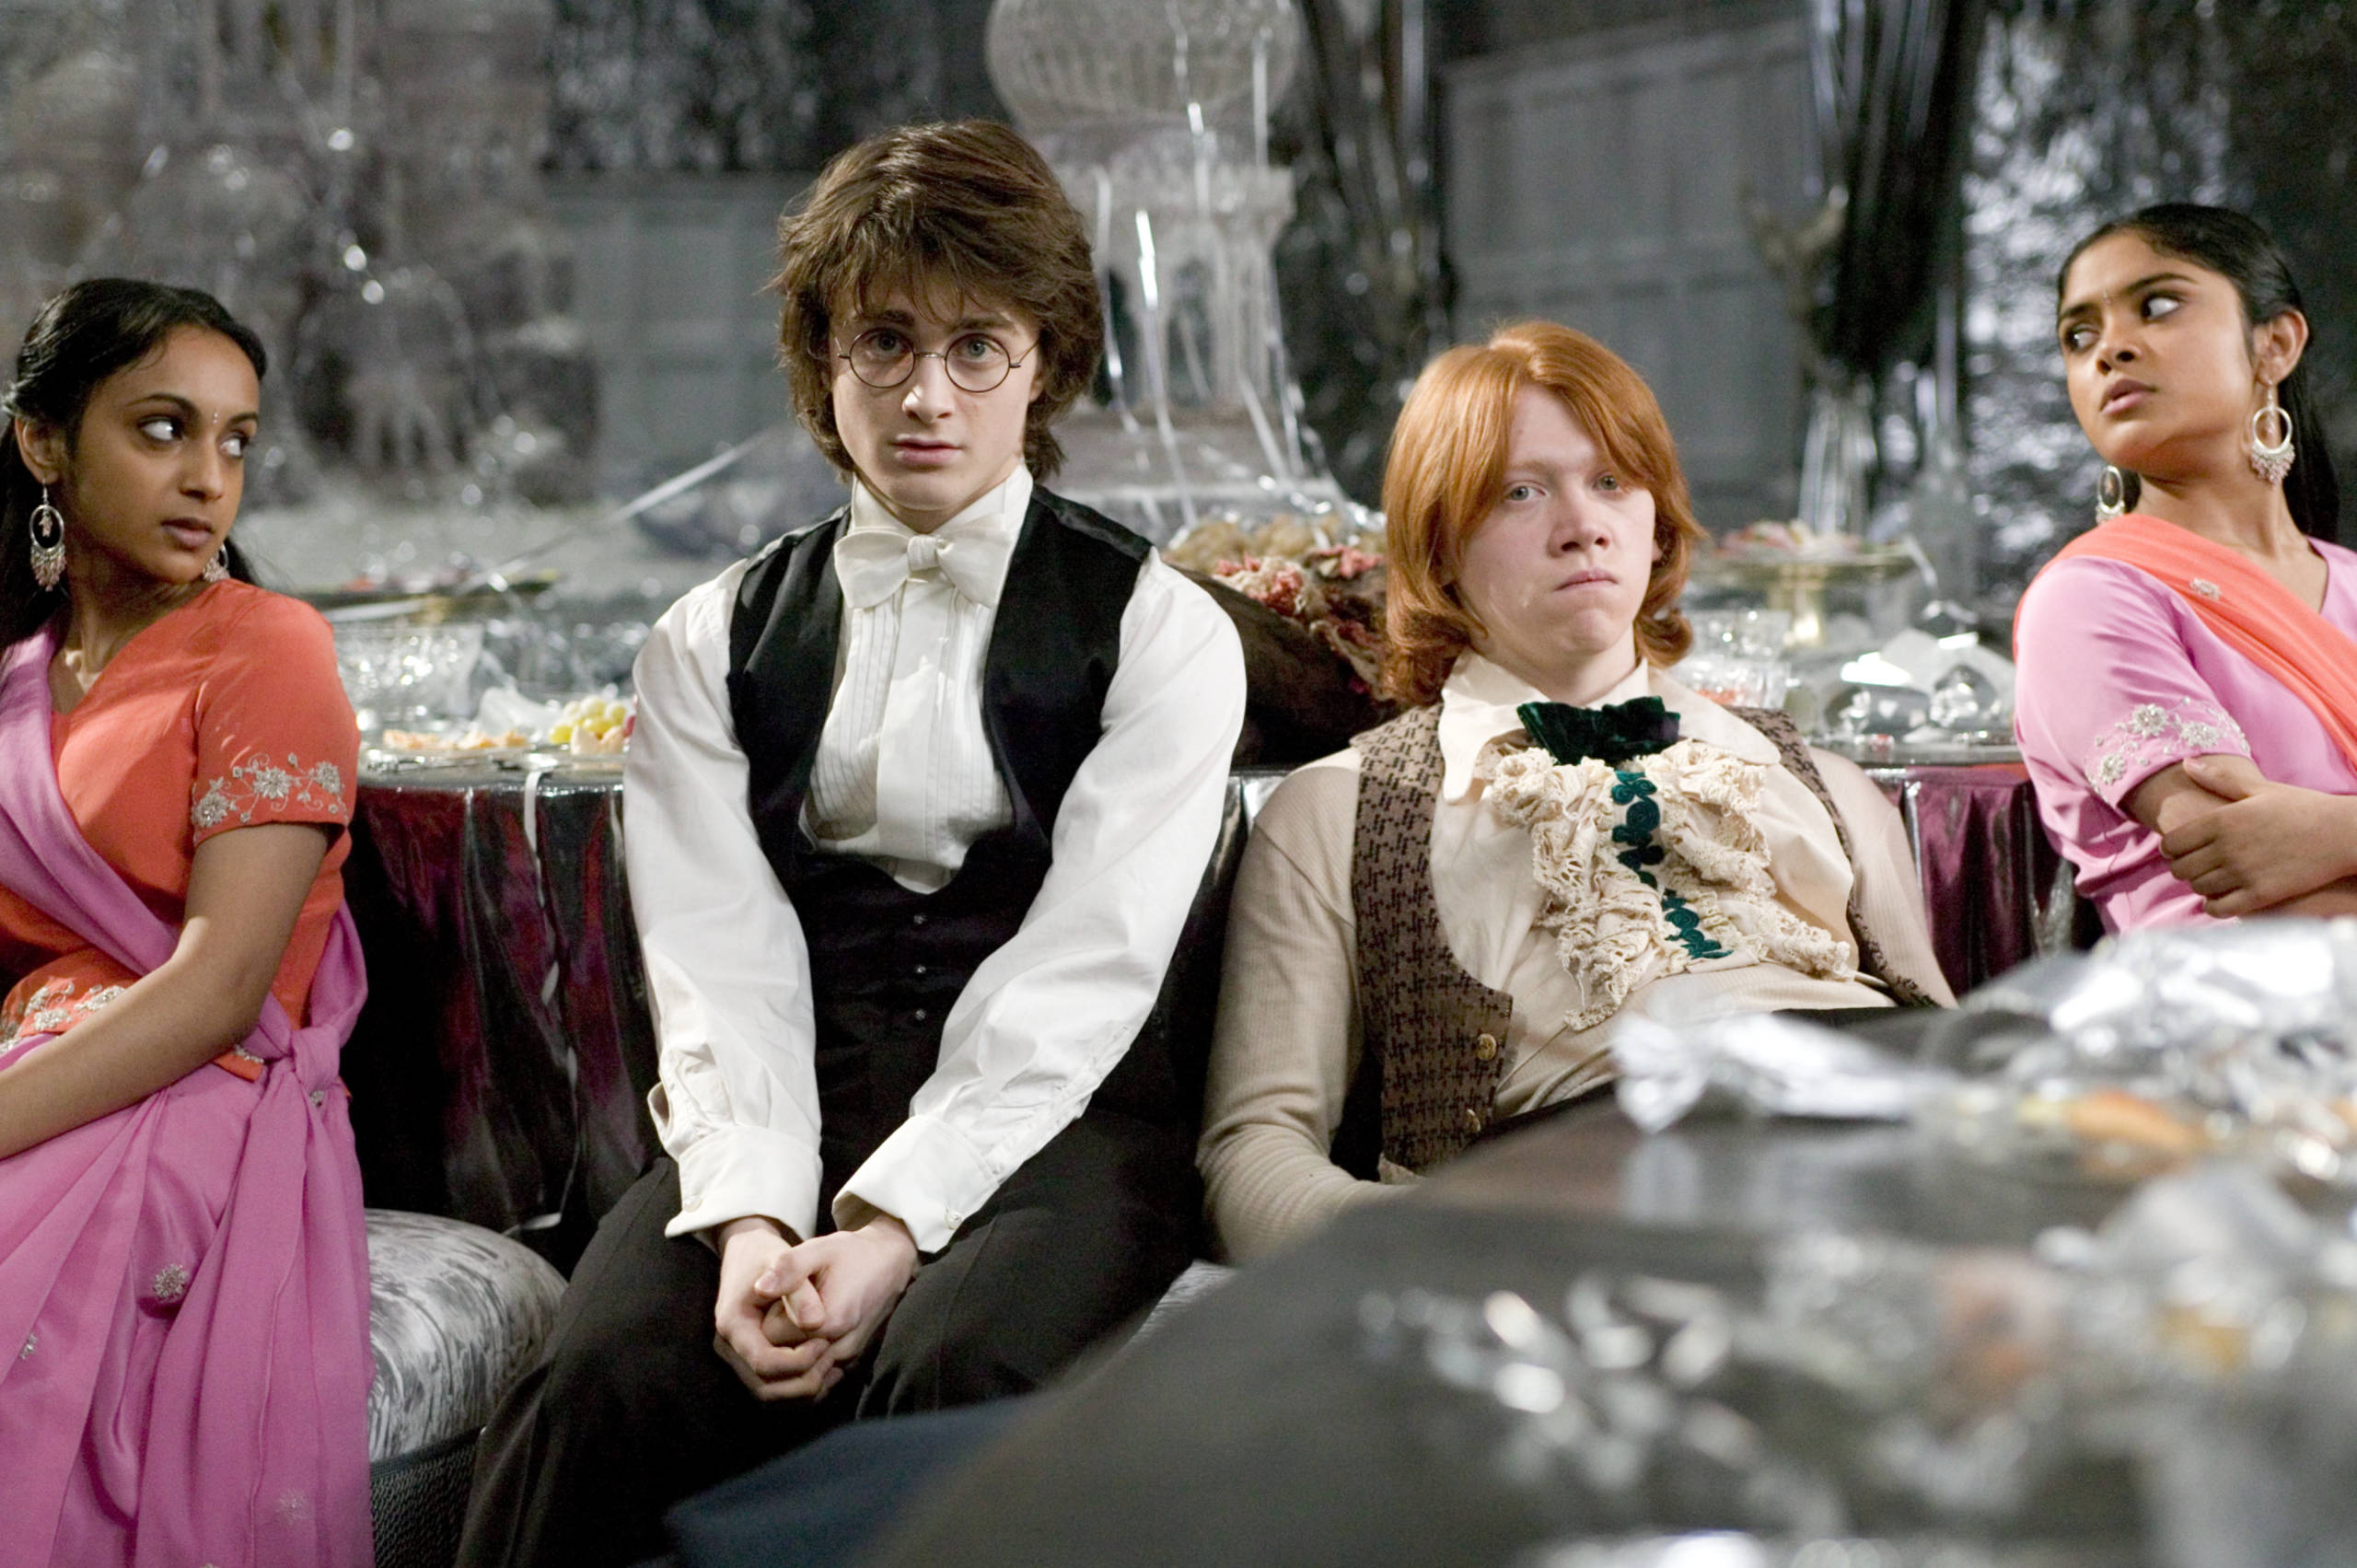 Who is the most stylish character in Harry Potter?